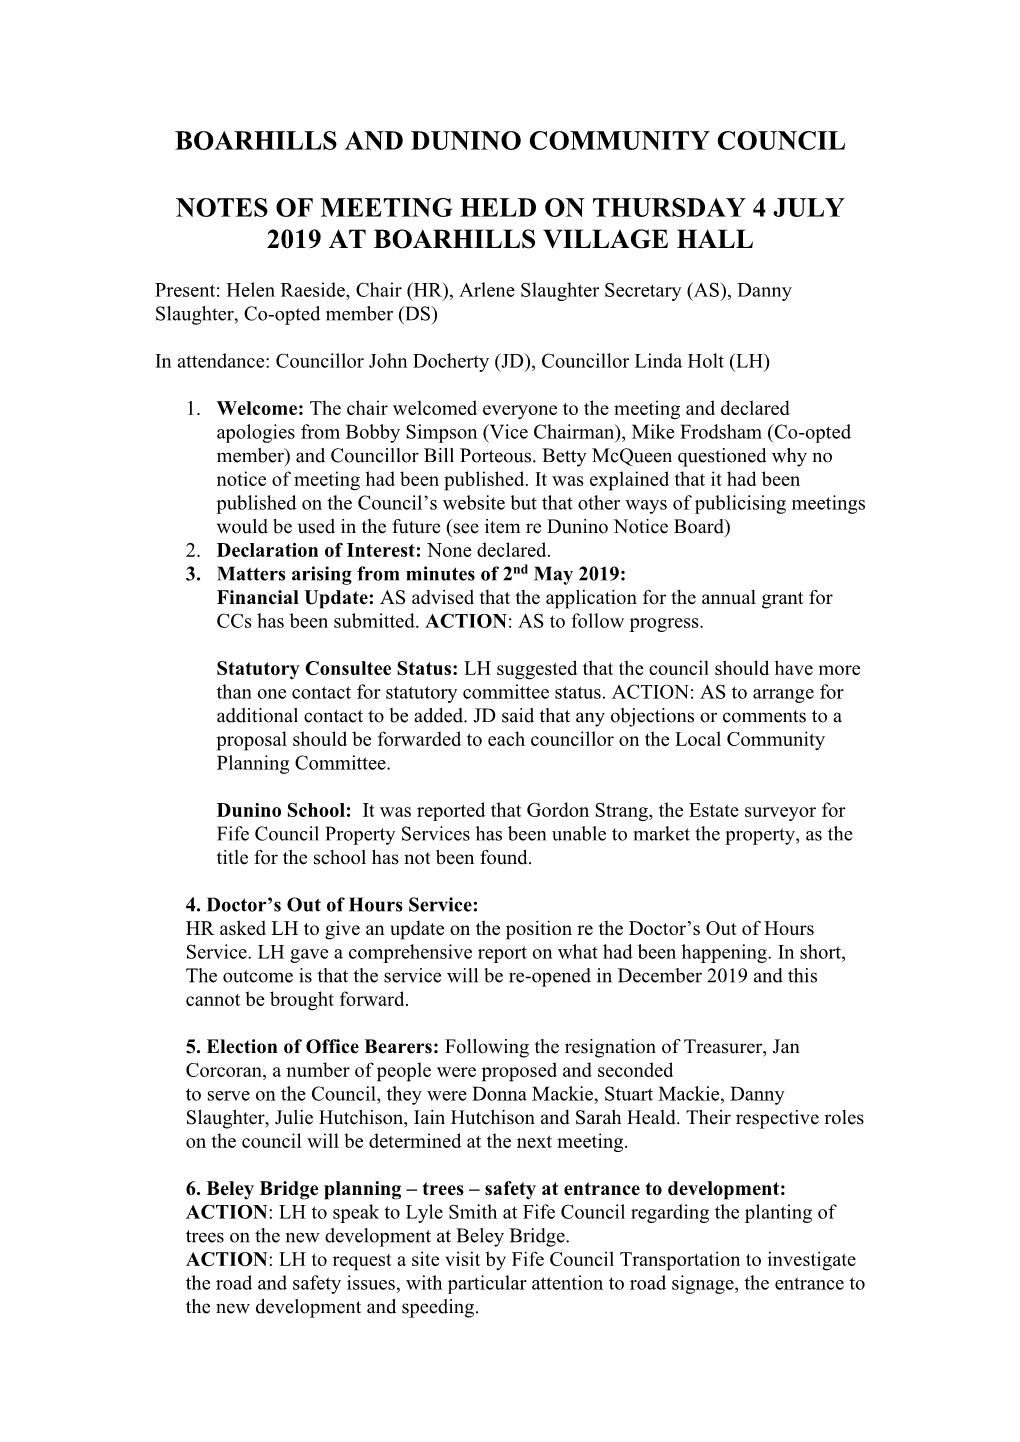 Boarhills and Dunino Community Council Notes Of